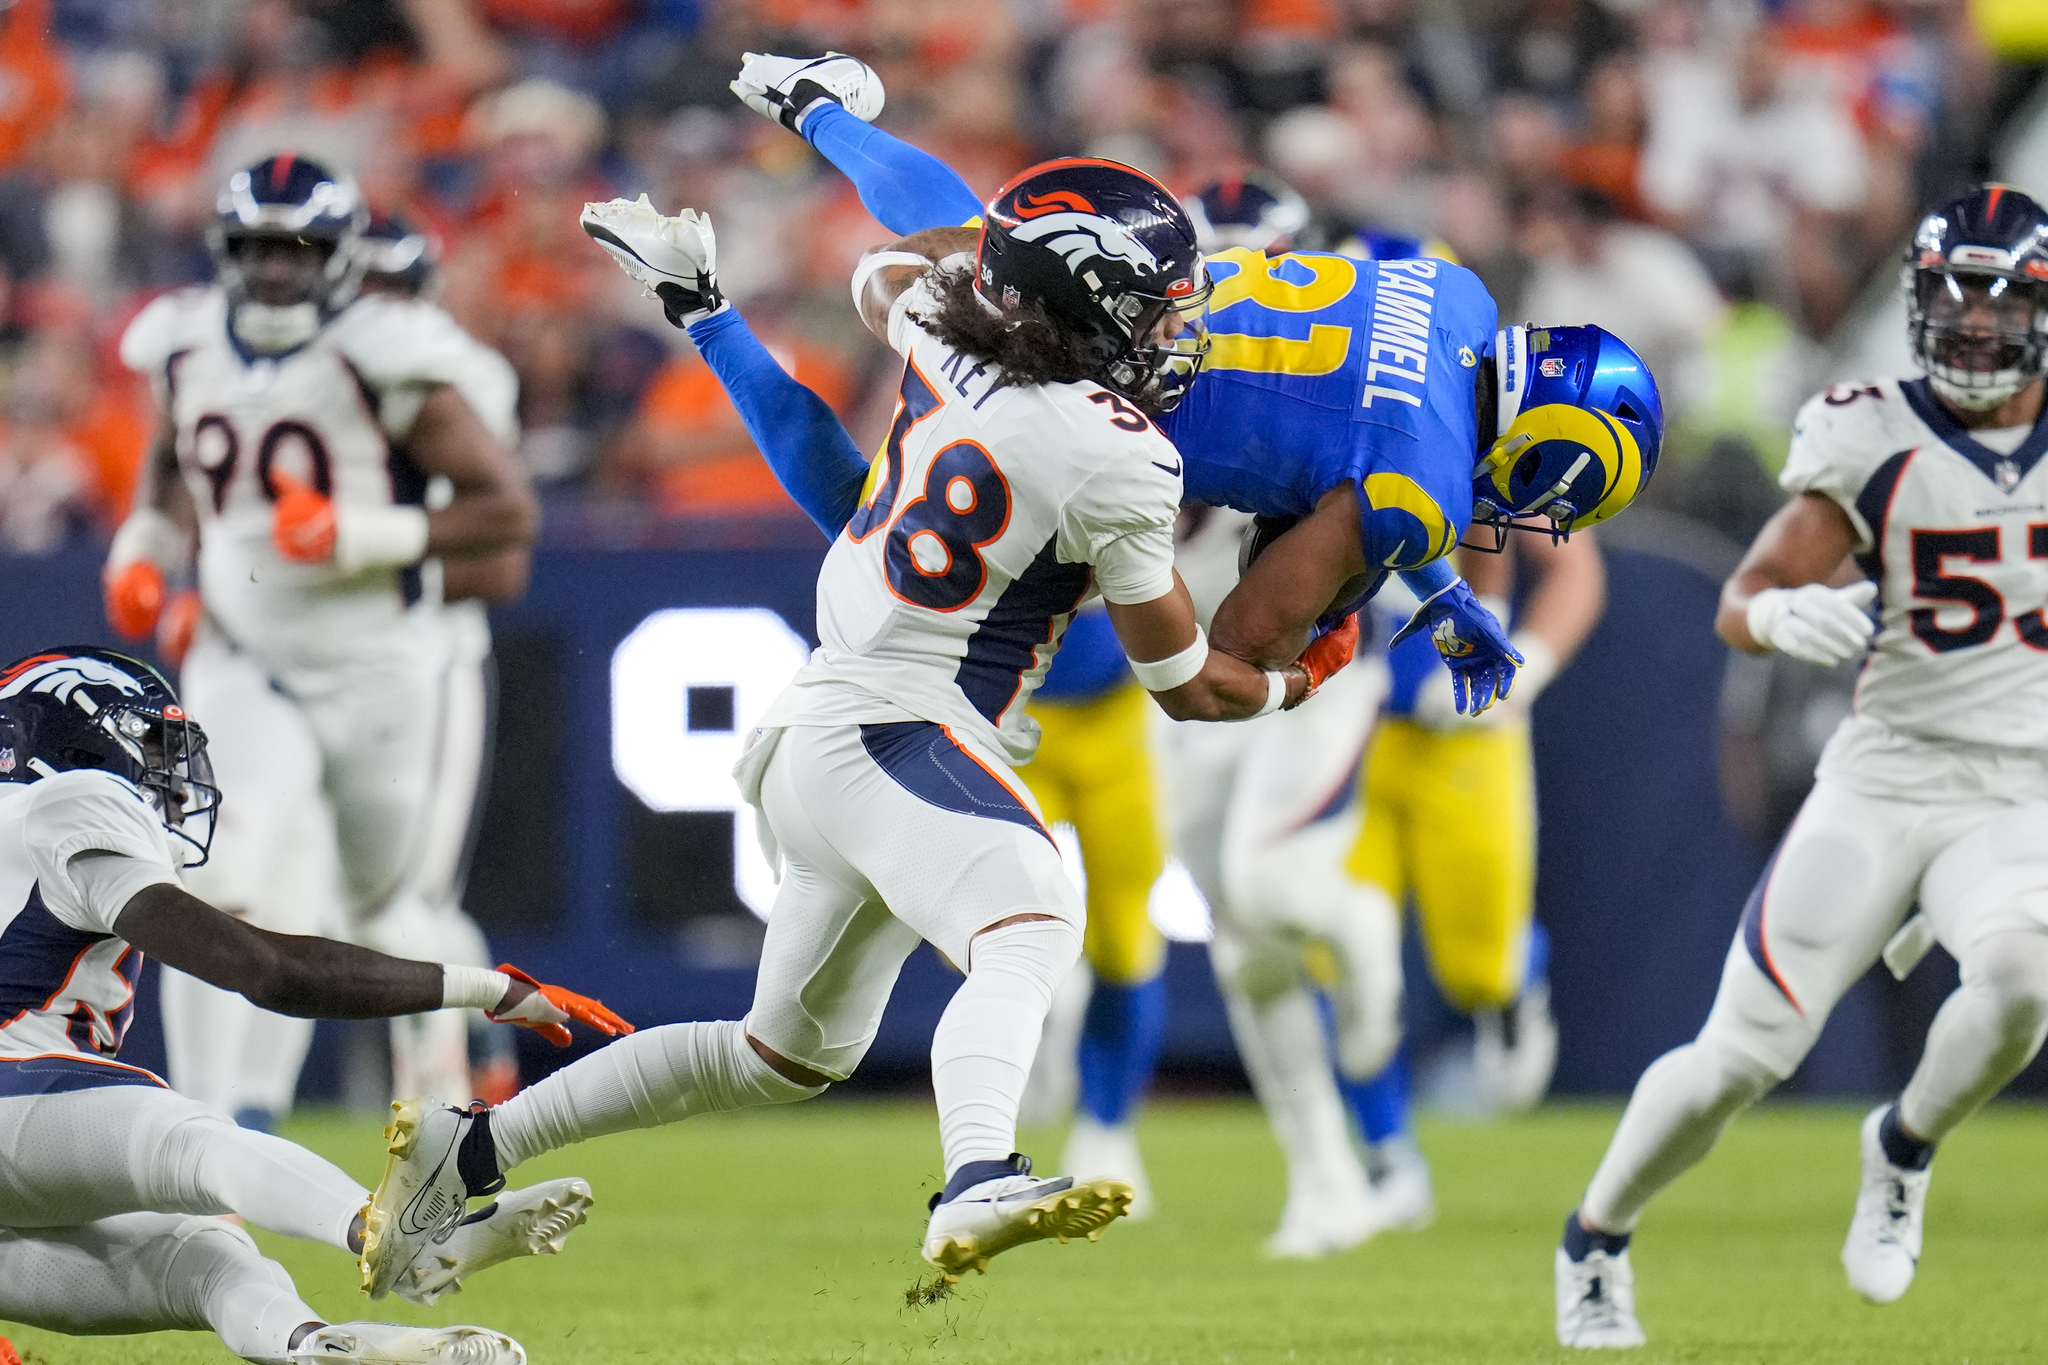 Sean Payton's Denver Broncos are primed for a big defensive year, and should not go undrafted in 2023 NFL Fantasy Drafts.